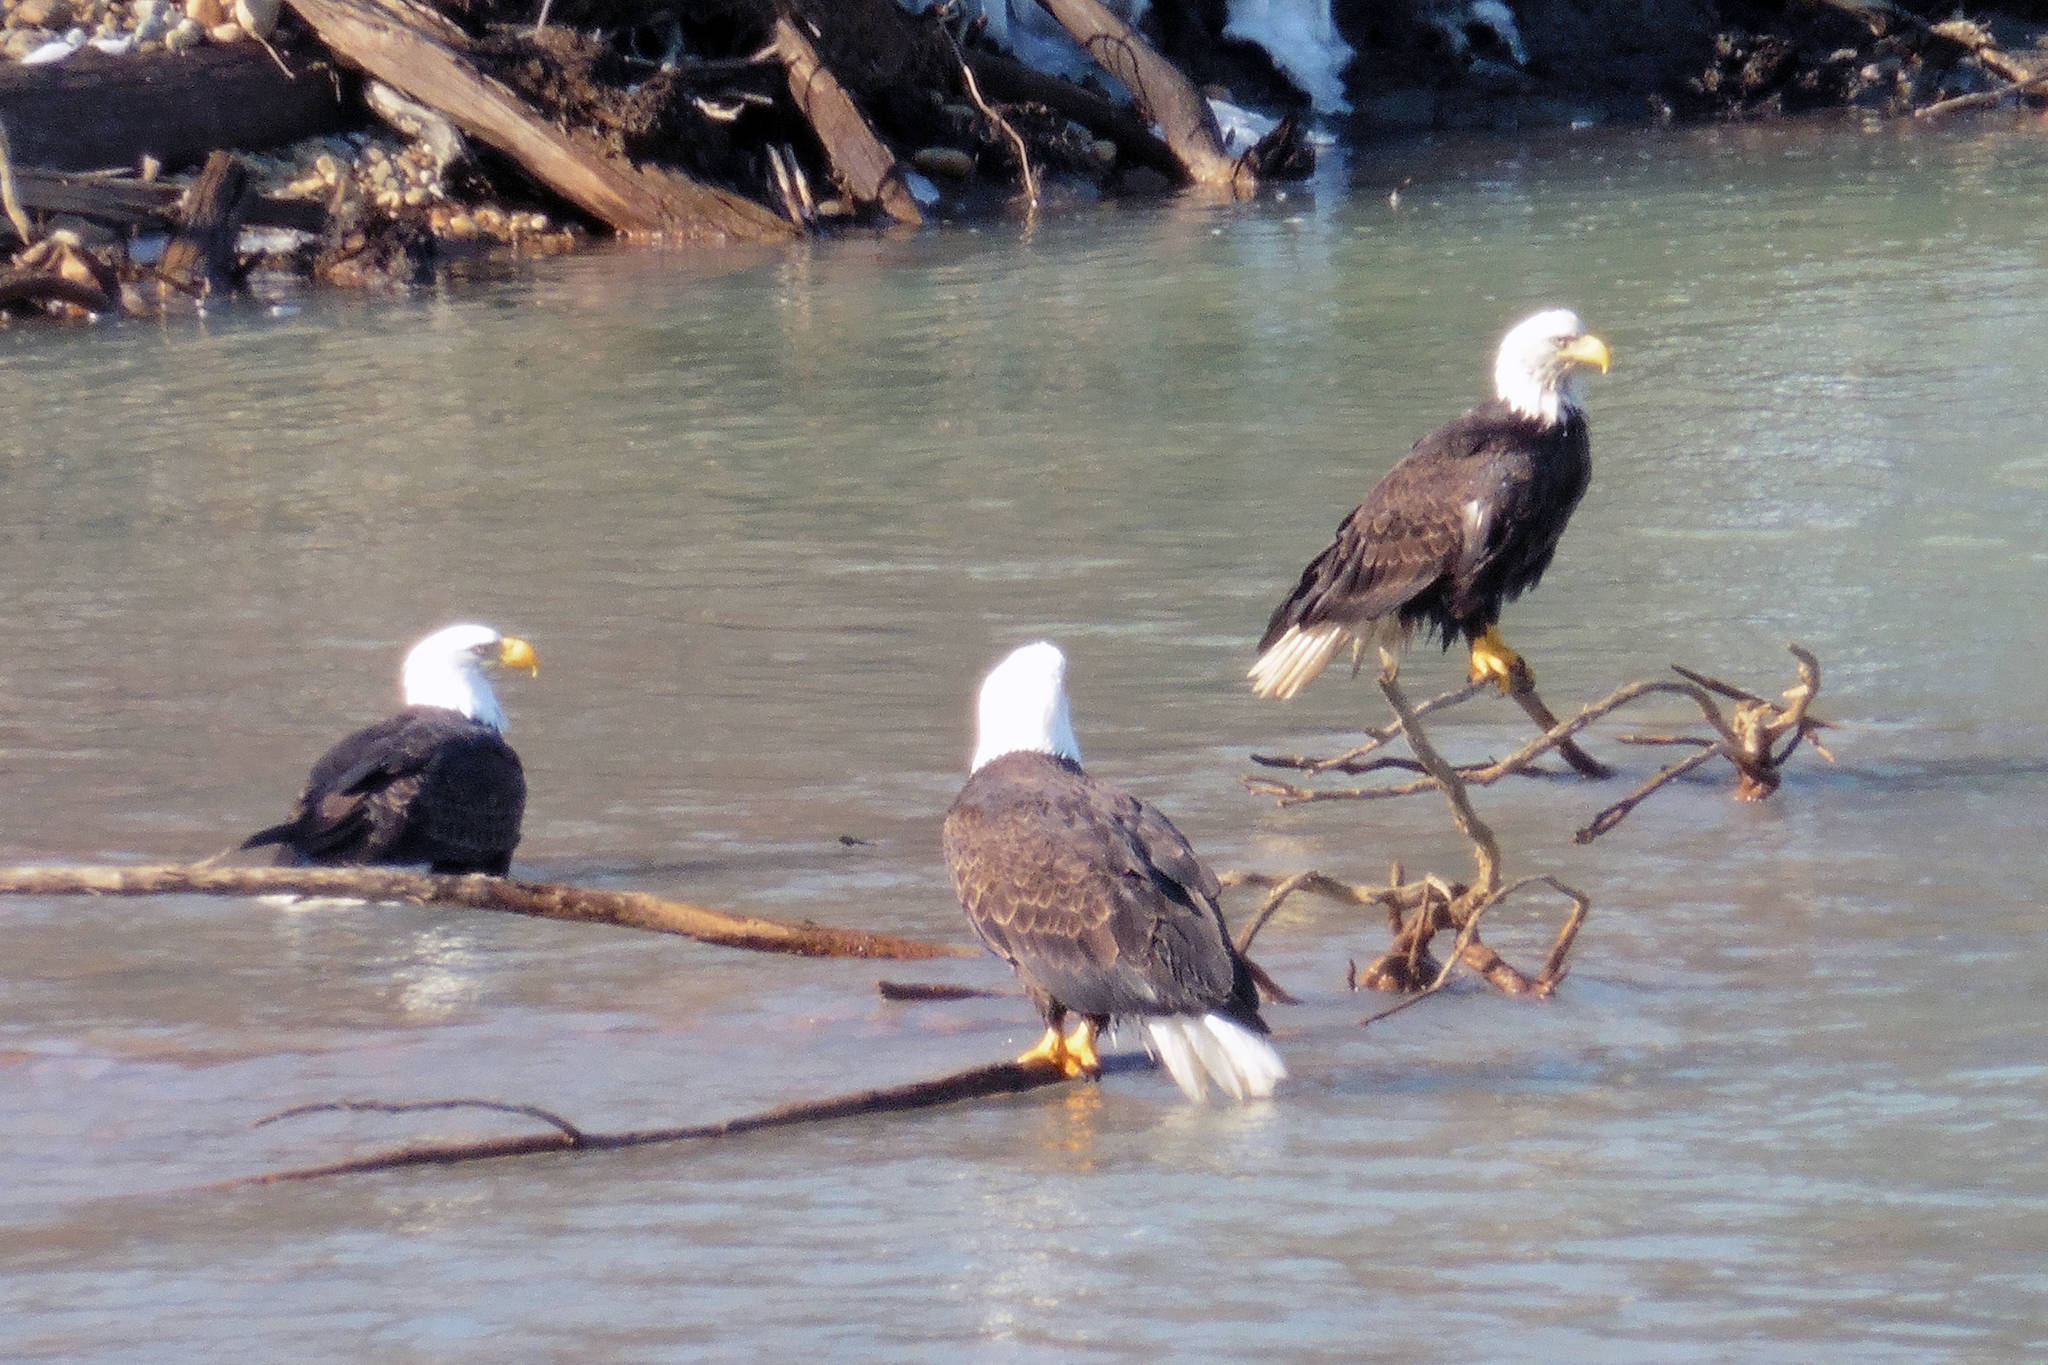 Three bald eagles take a spring bath on March 19. Photographer David Athearn says social distancing was observed. (Courtesy Photo | David Athearn)